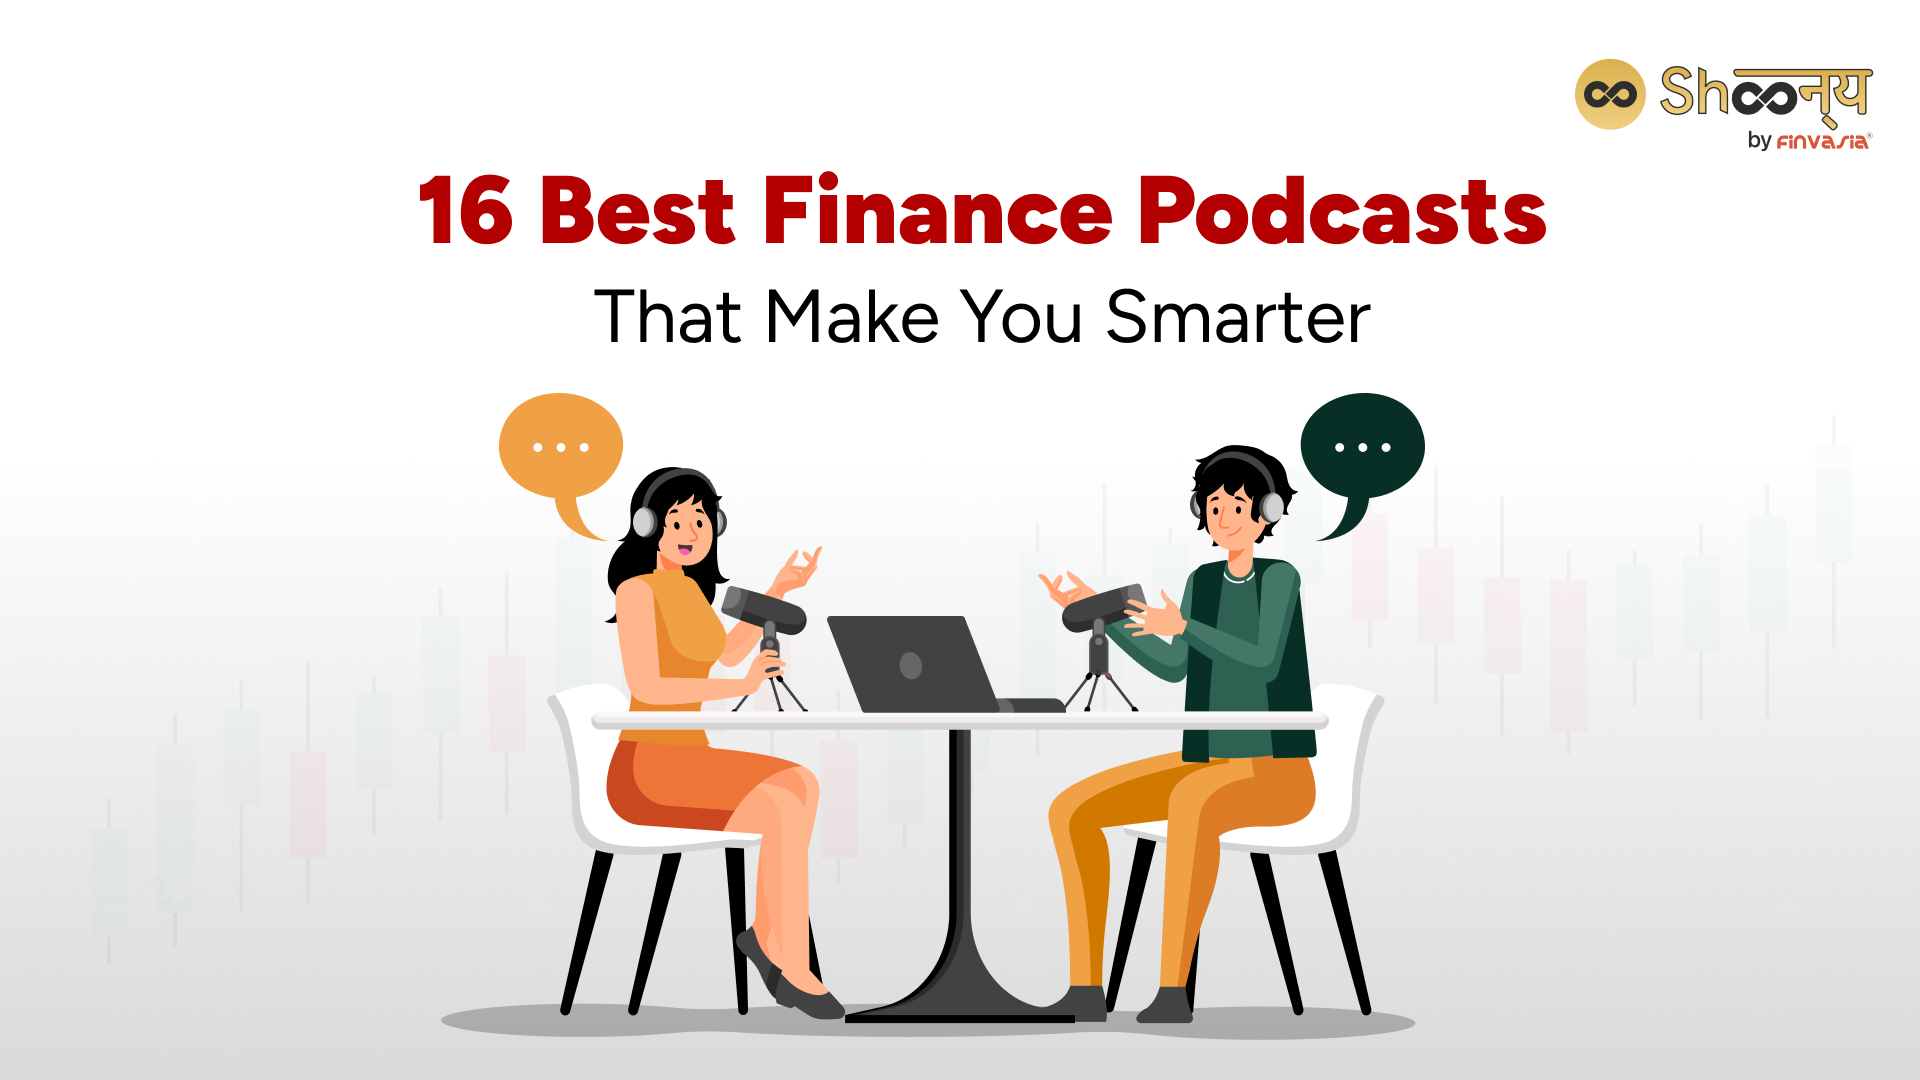 16 Best Finance Podcasts That Make You Smarter